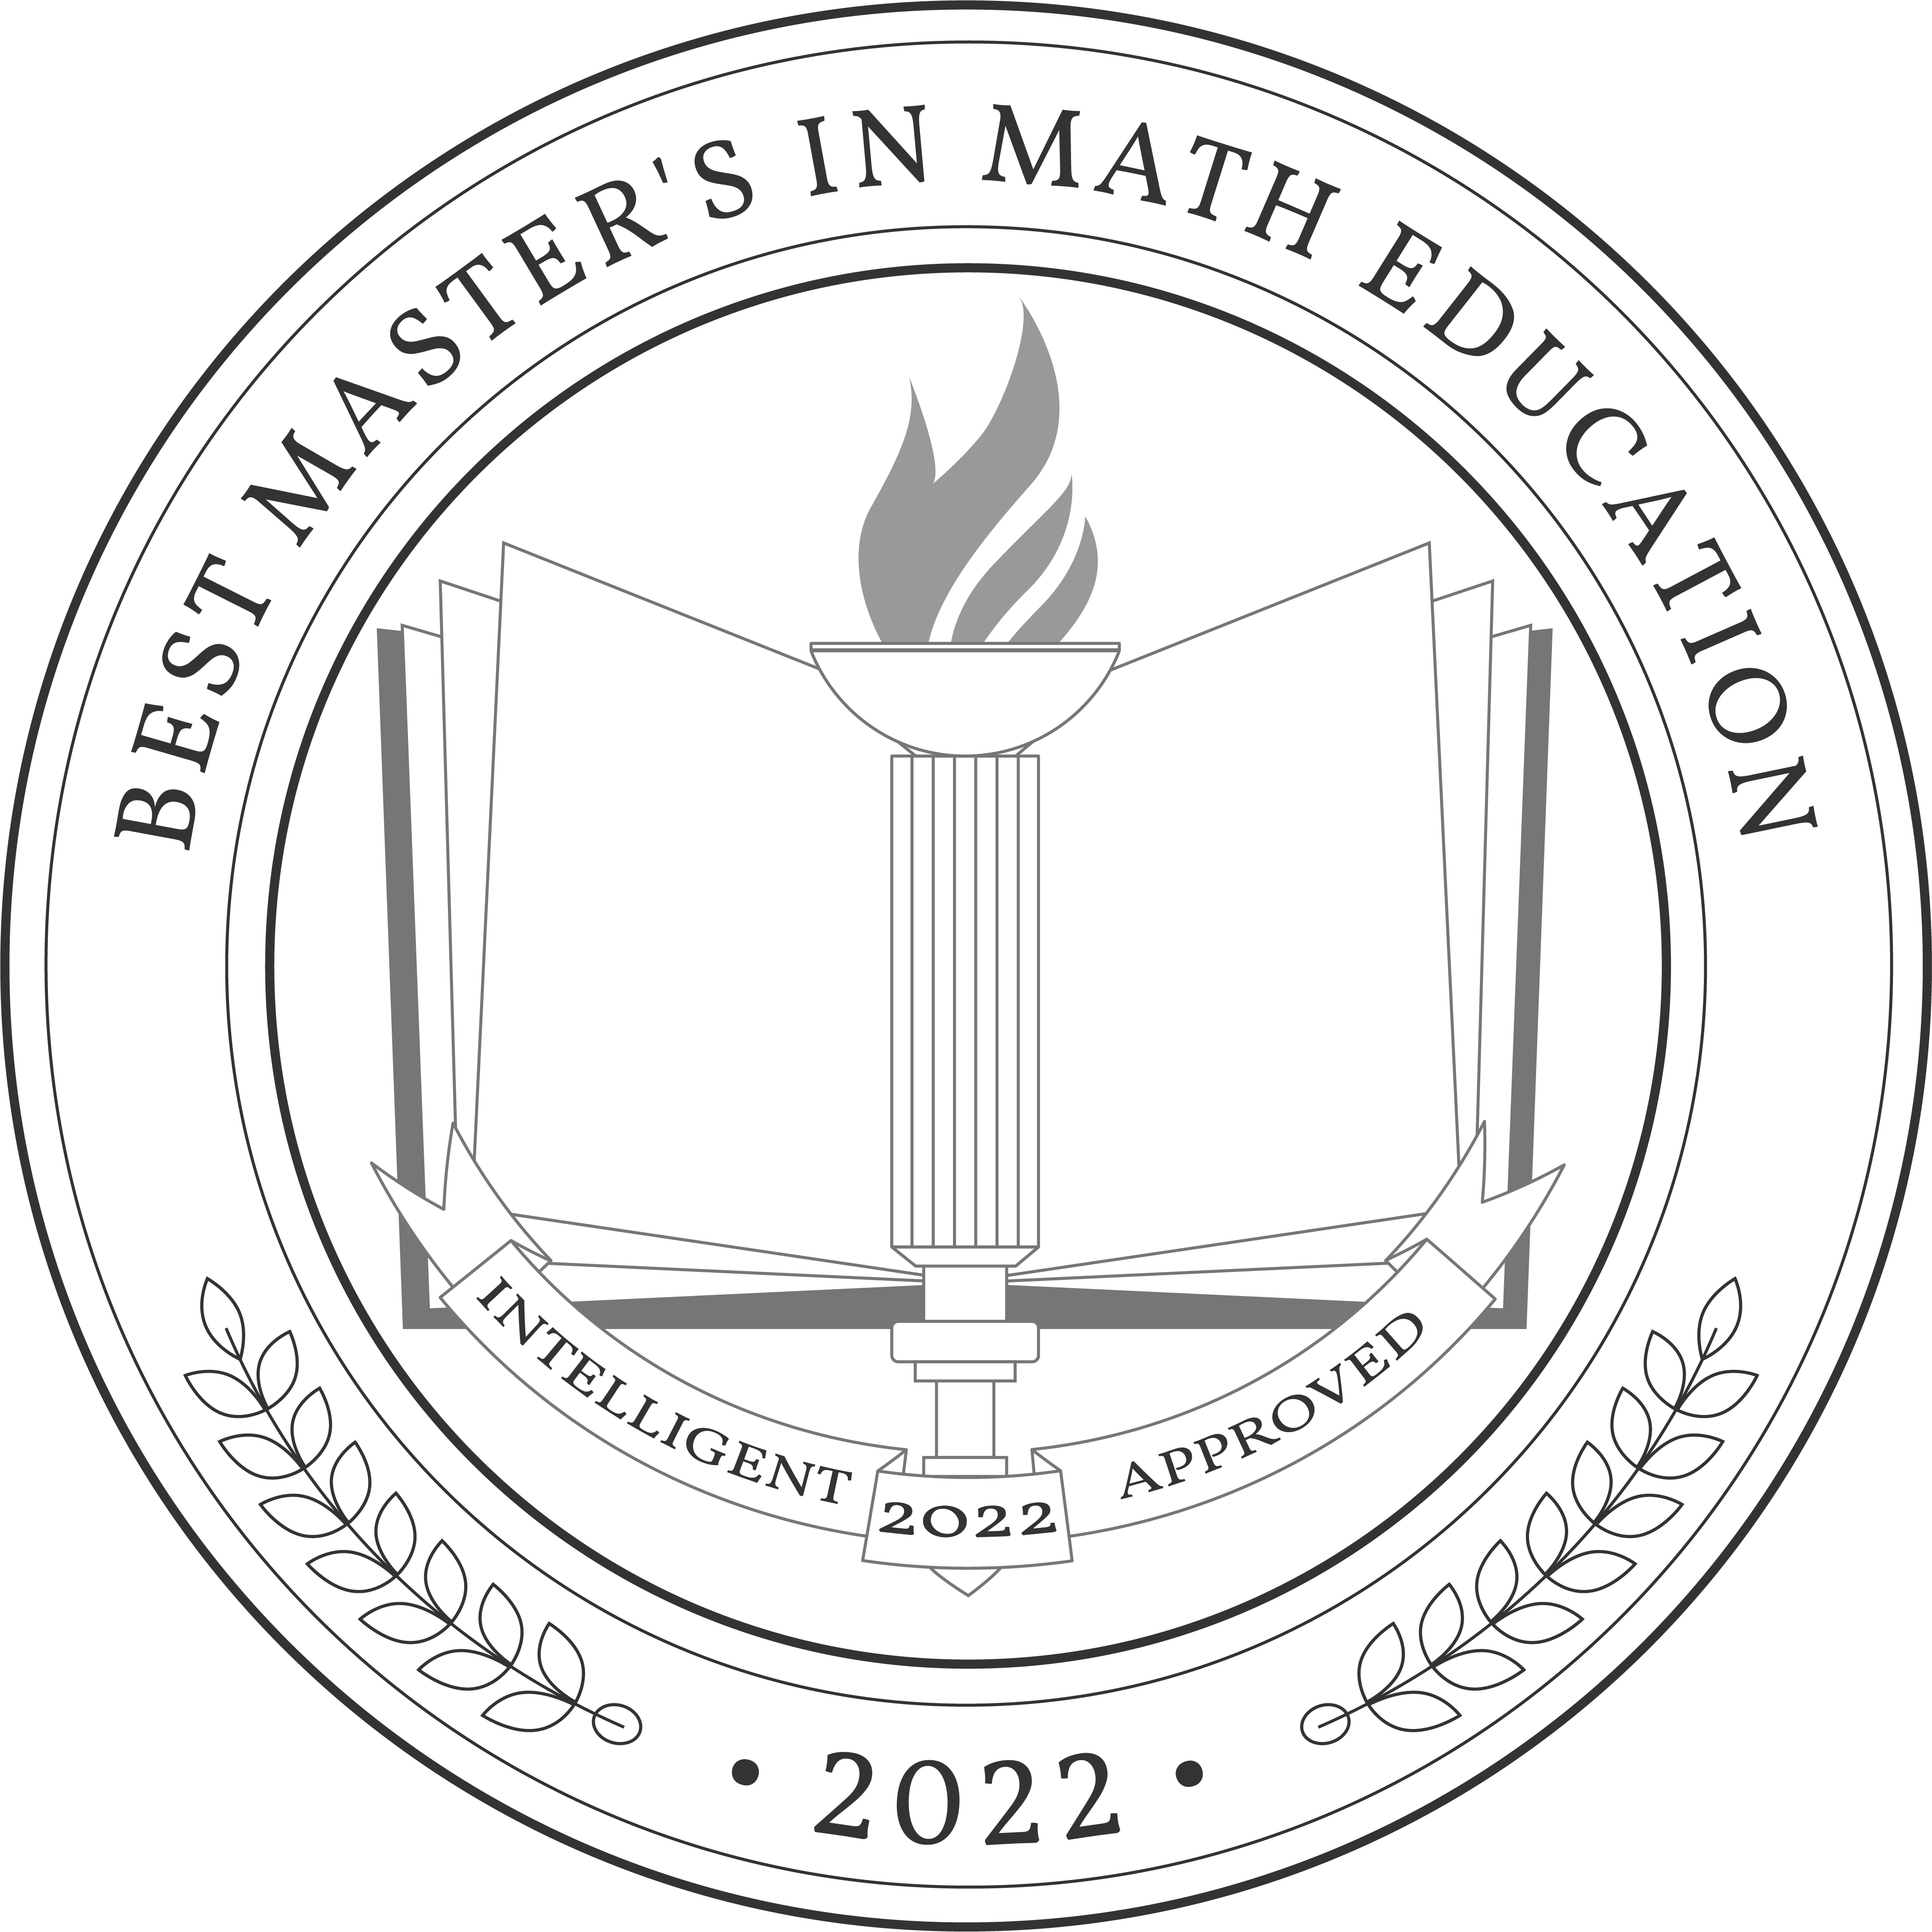 Best-Masters-in-Math-Education-Badge-1.png